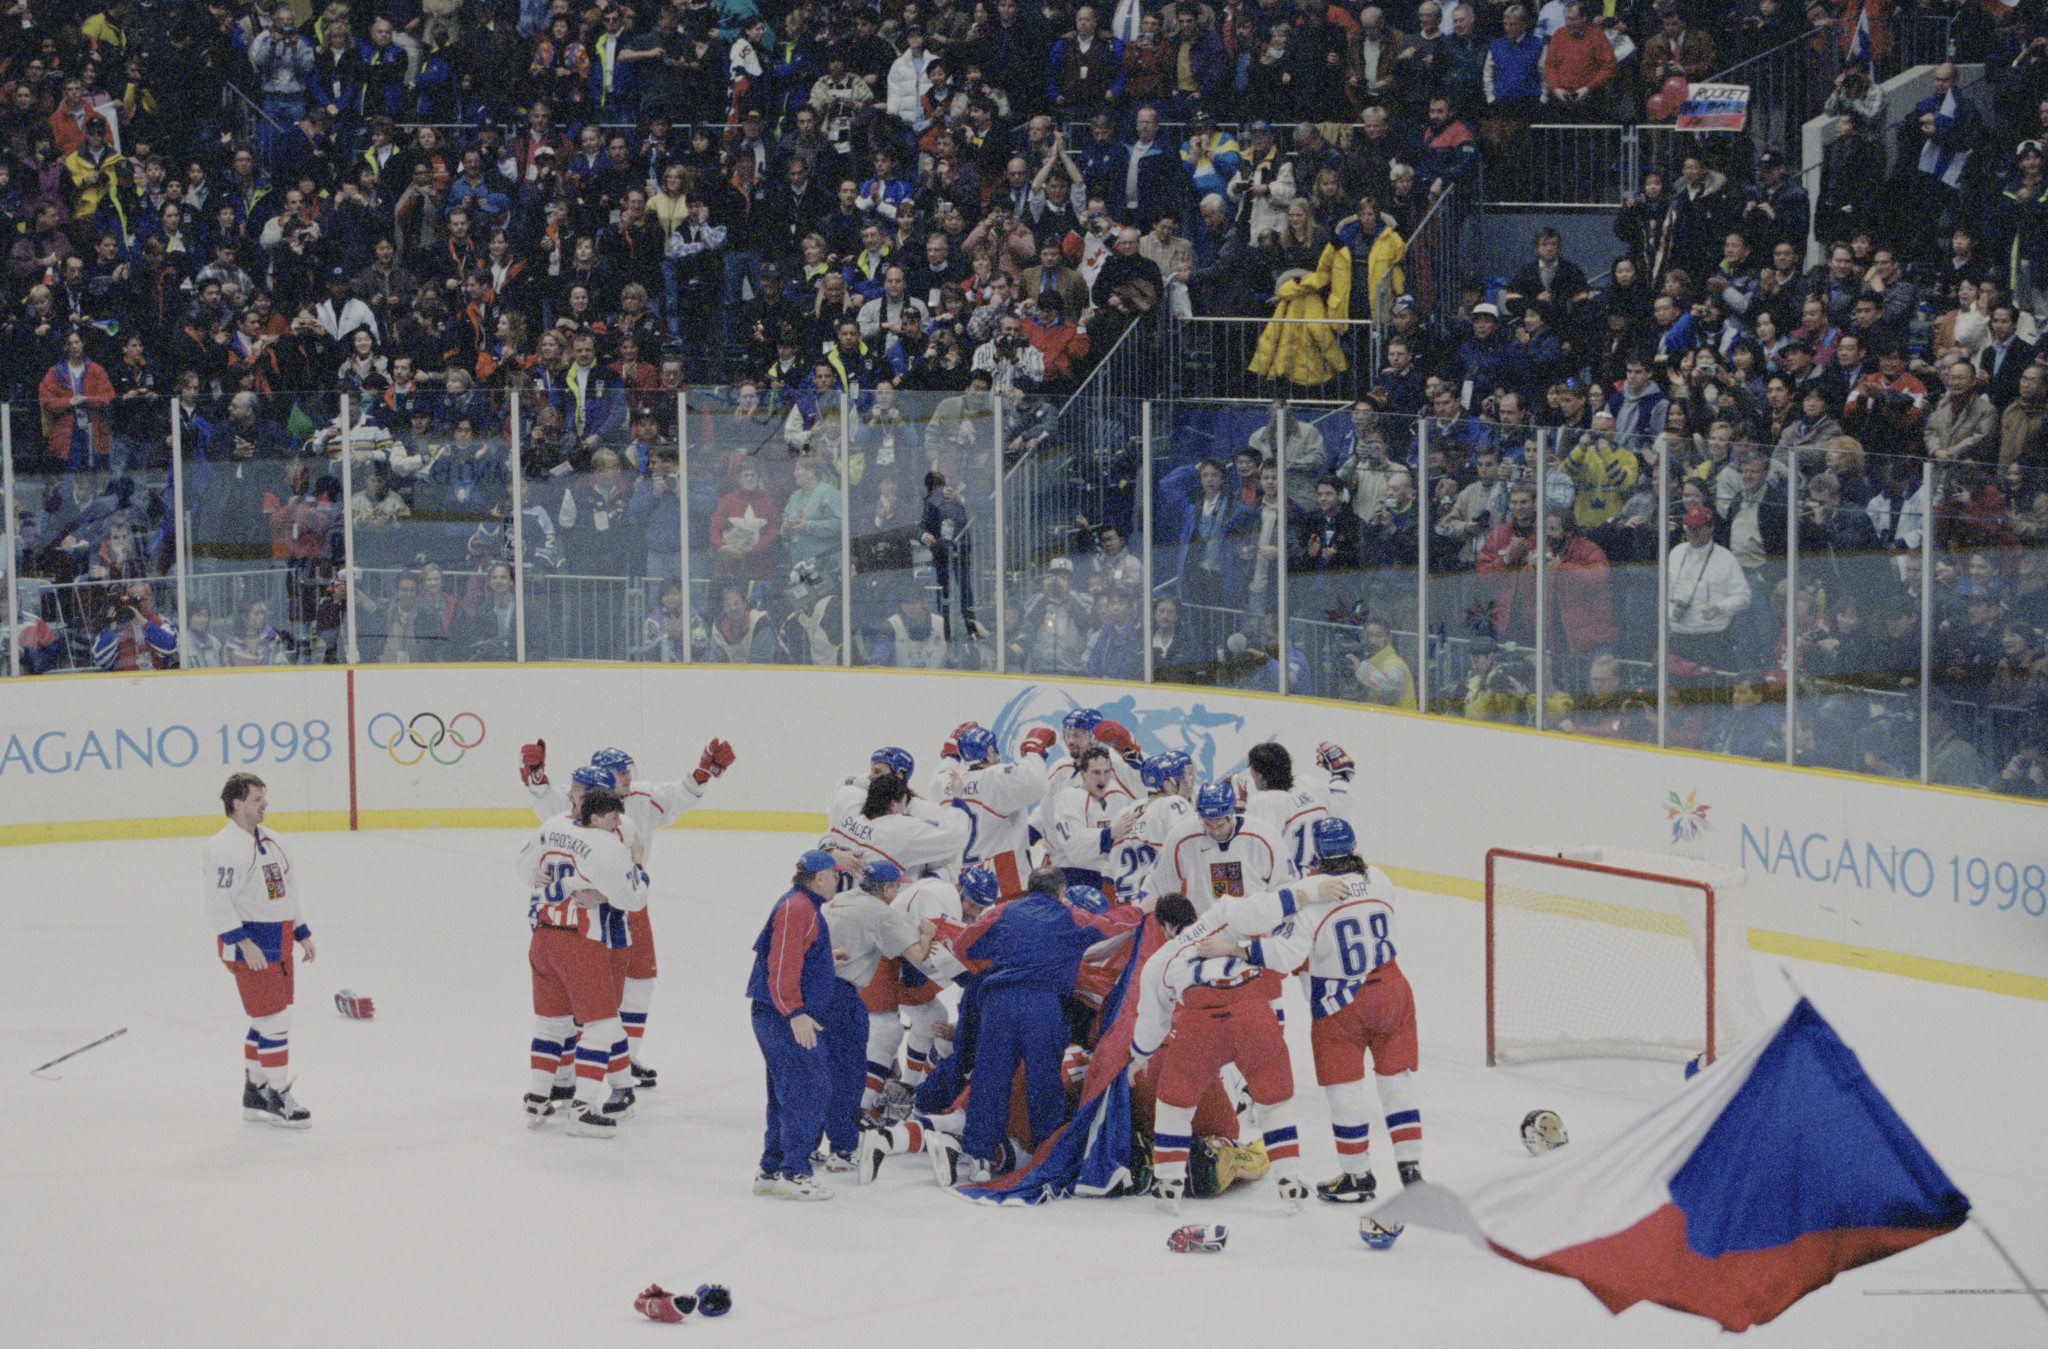 The Nagano Tapes tells the story of the Czech Republic men's ice hockey team which won the gold medal at Nagano 1998 ©Getty Images